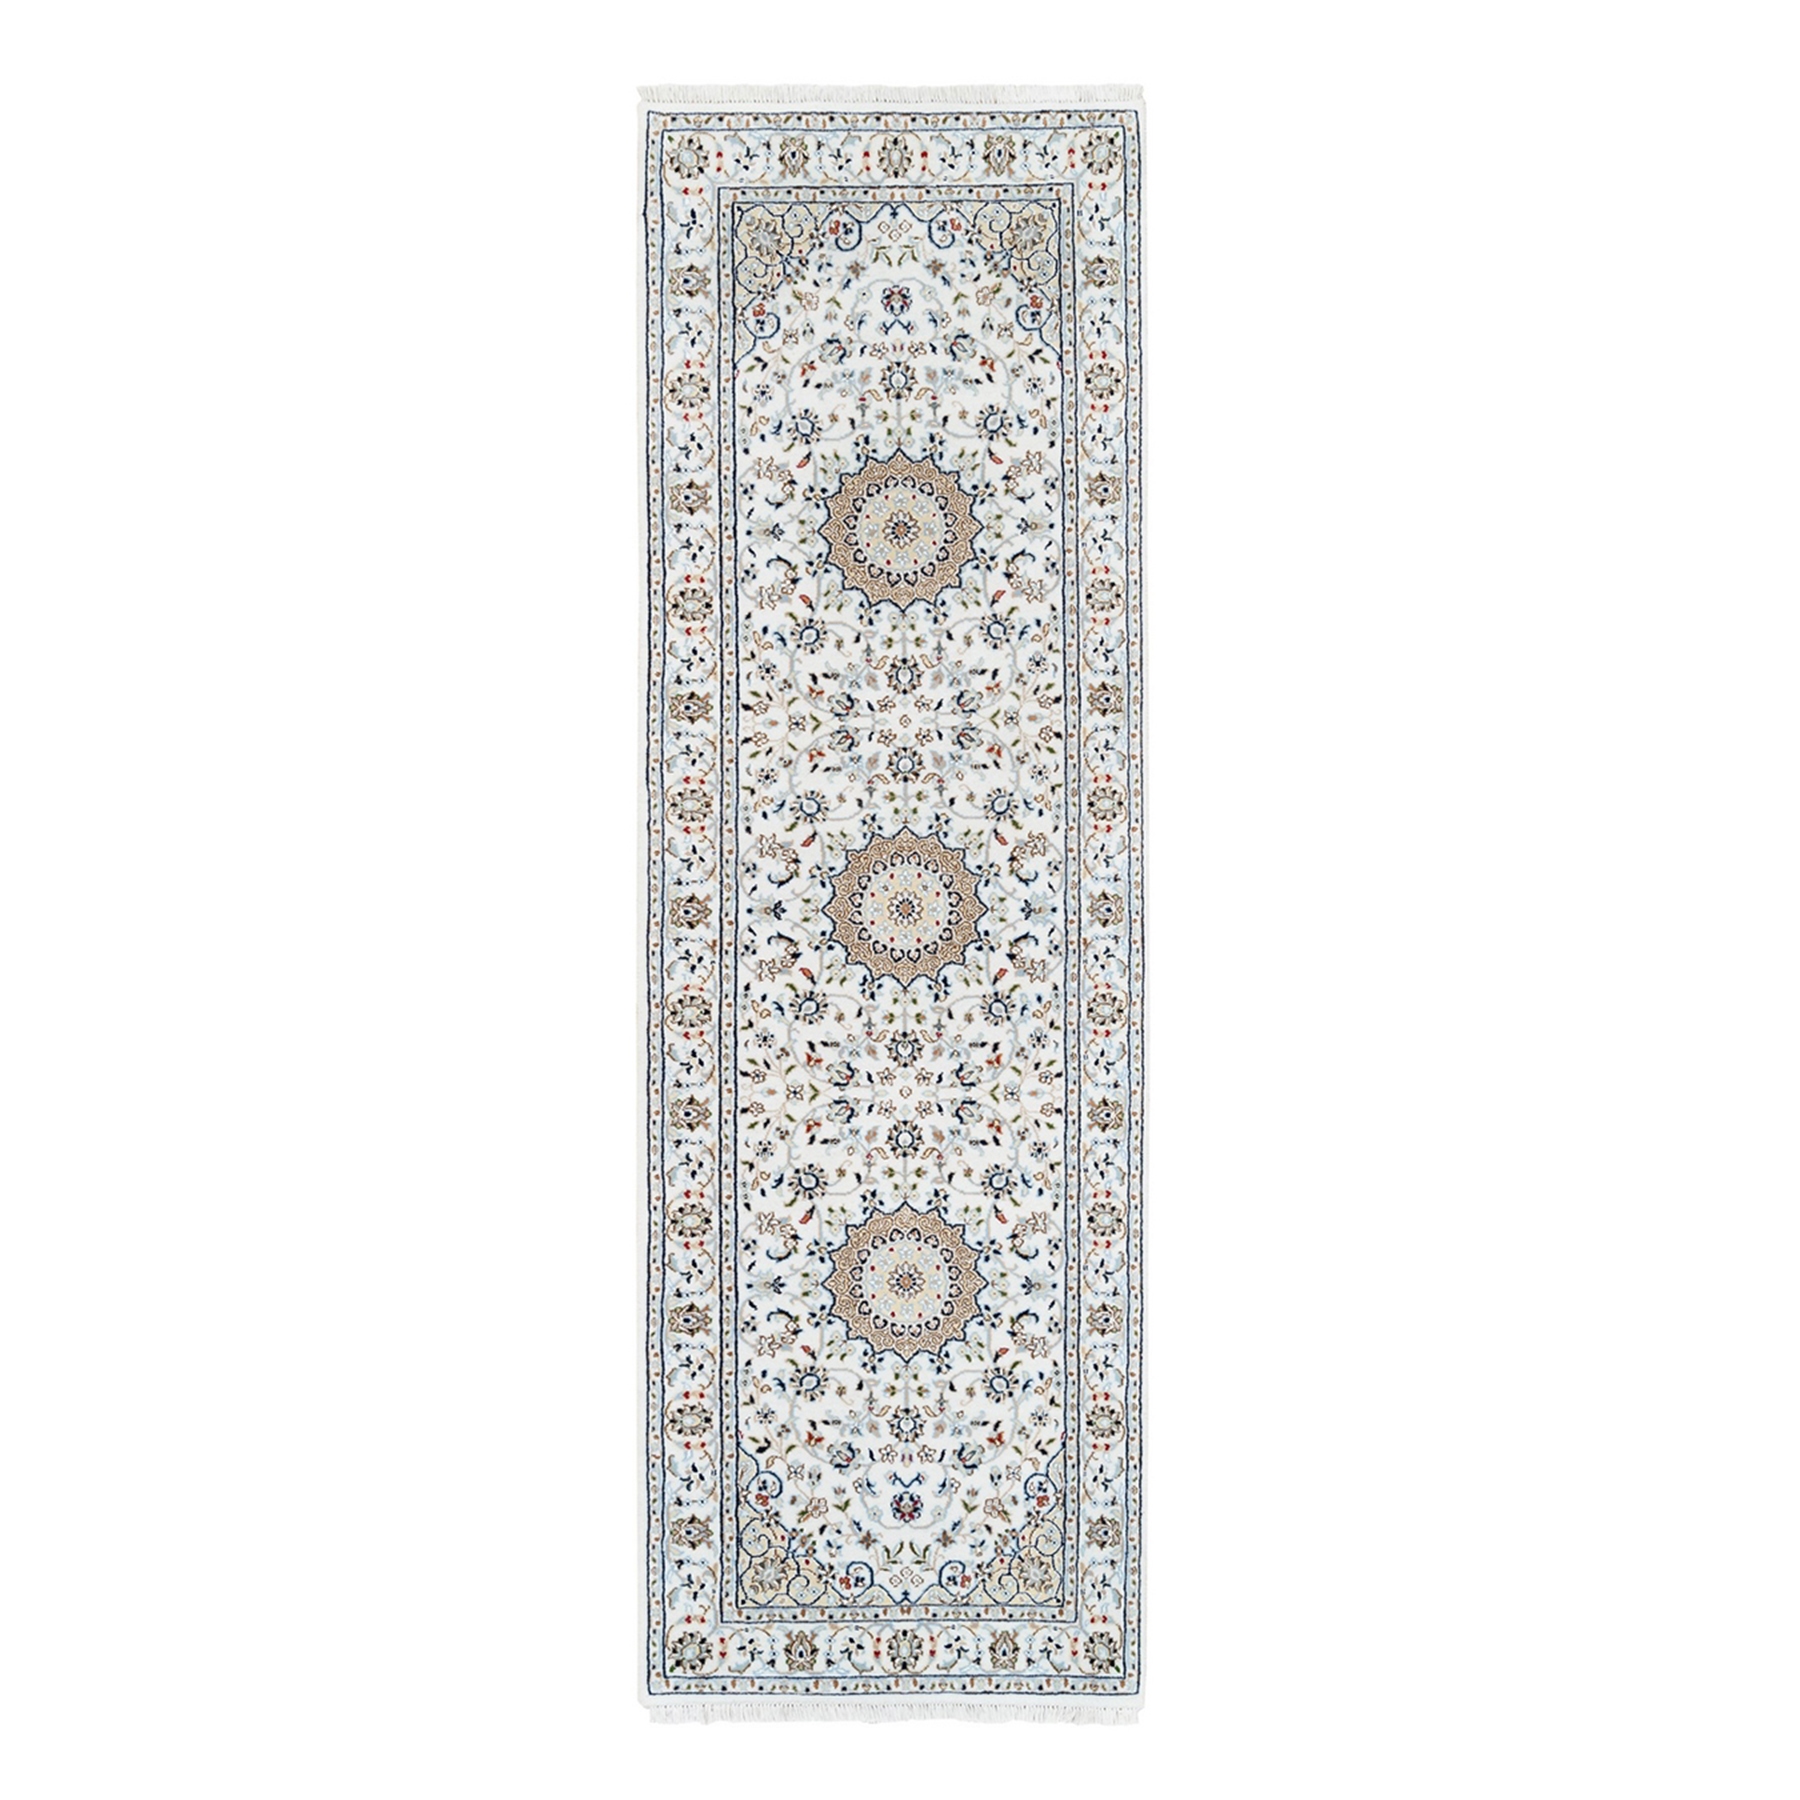 Pirniakan Collection Hand Knotted Ivory Rug No: 1125406